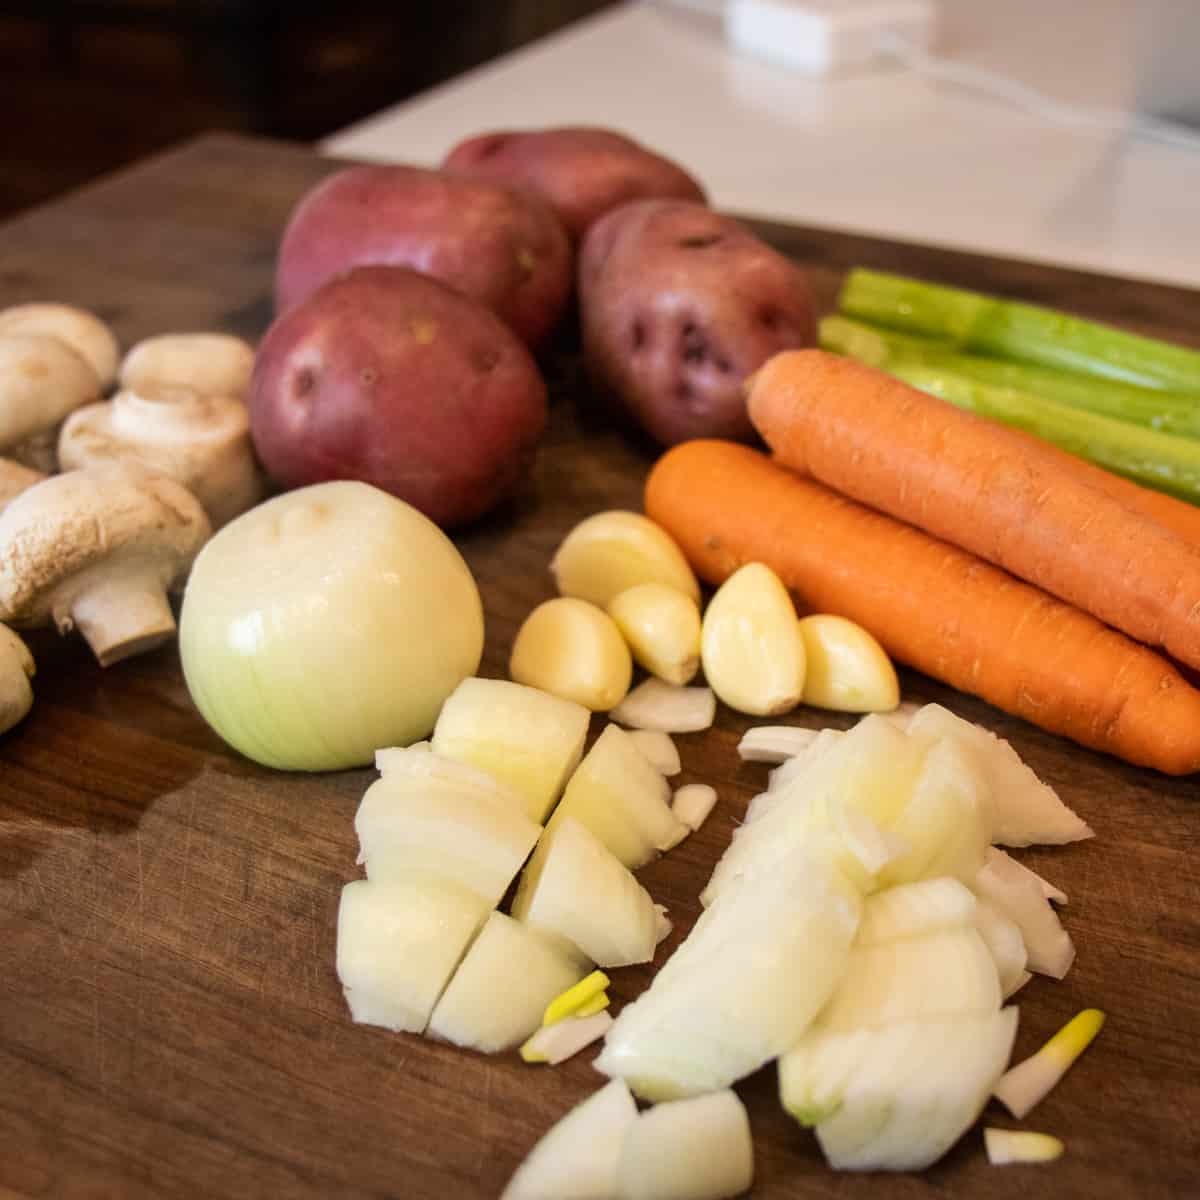 Cutting board with cut up vegetables.